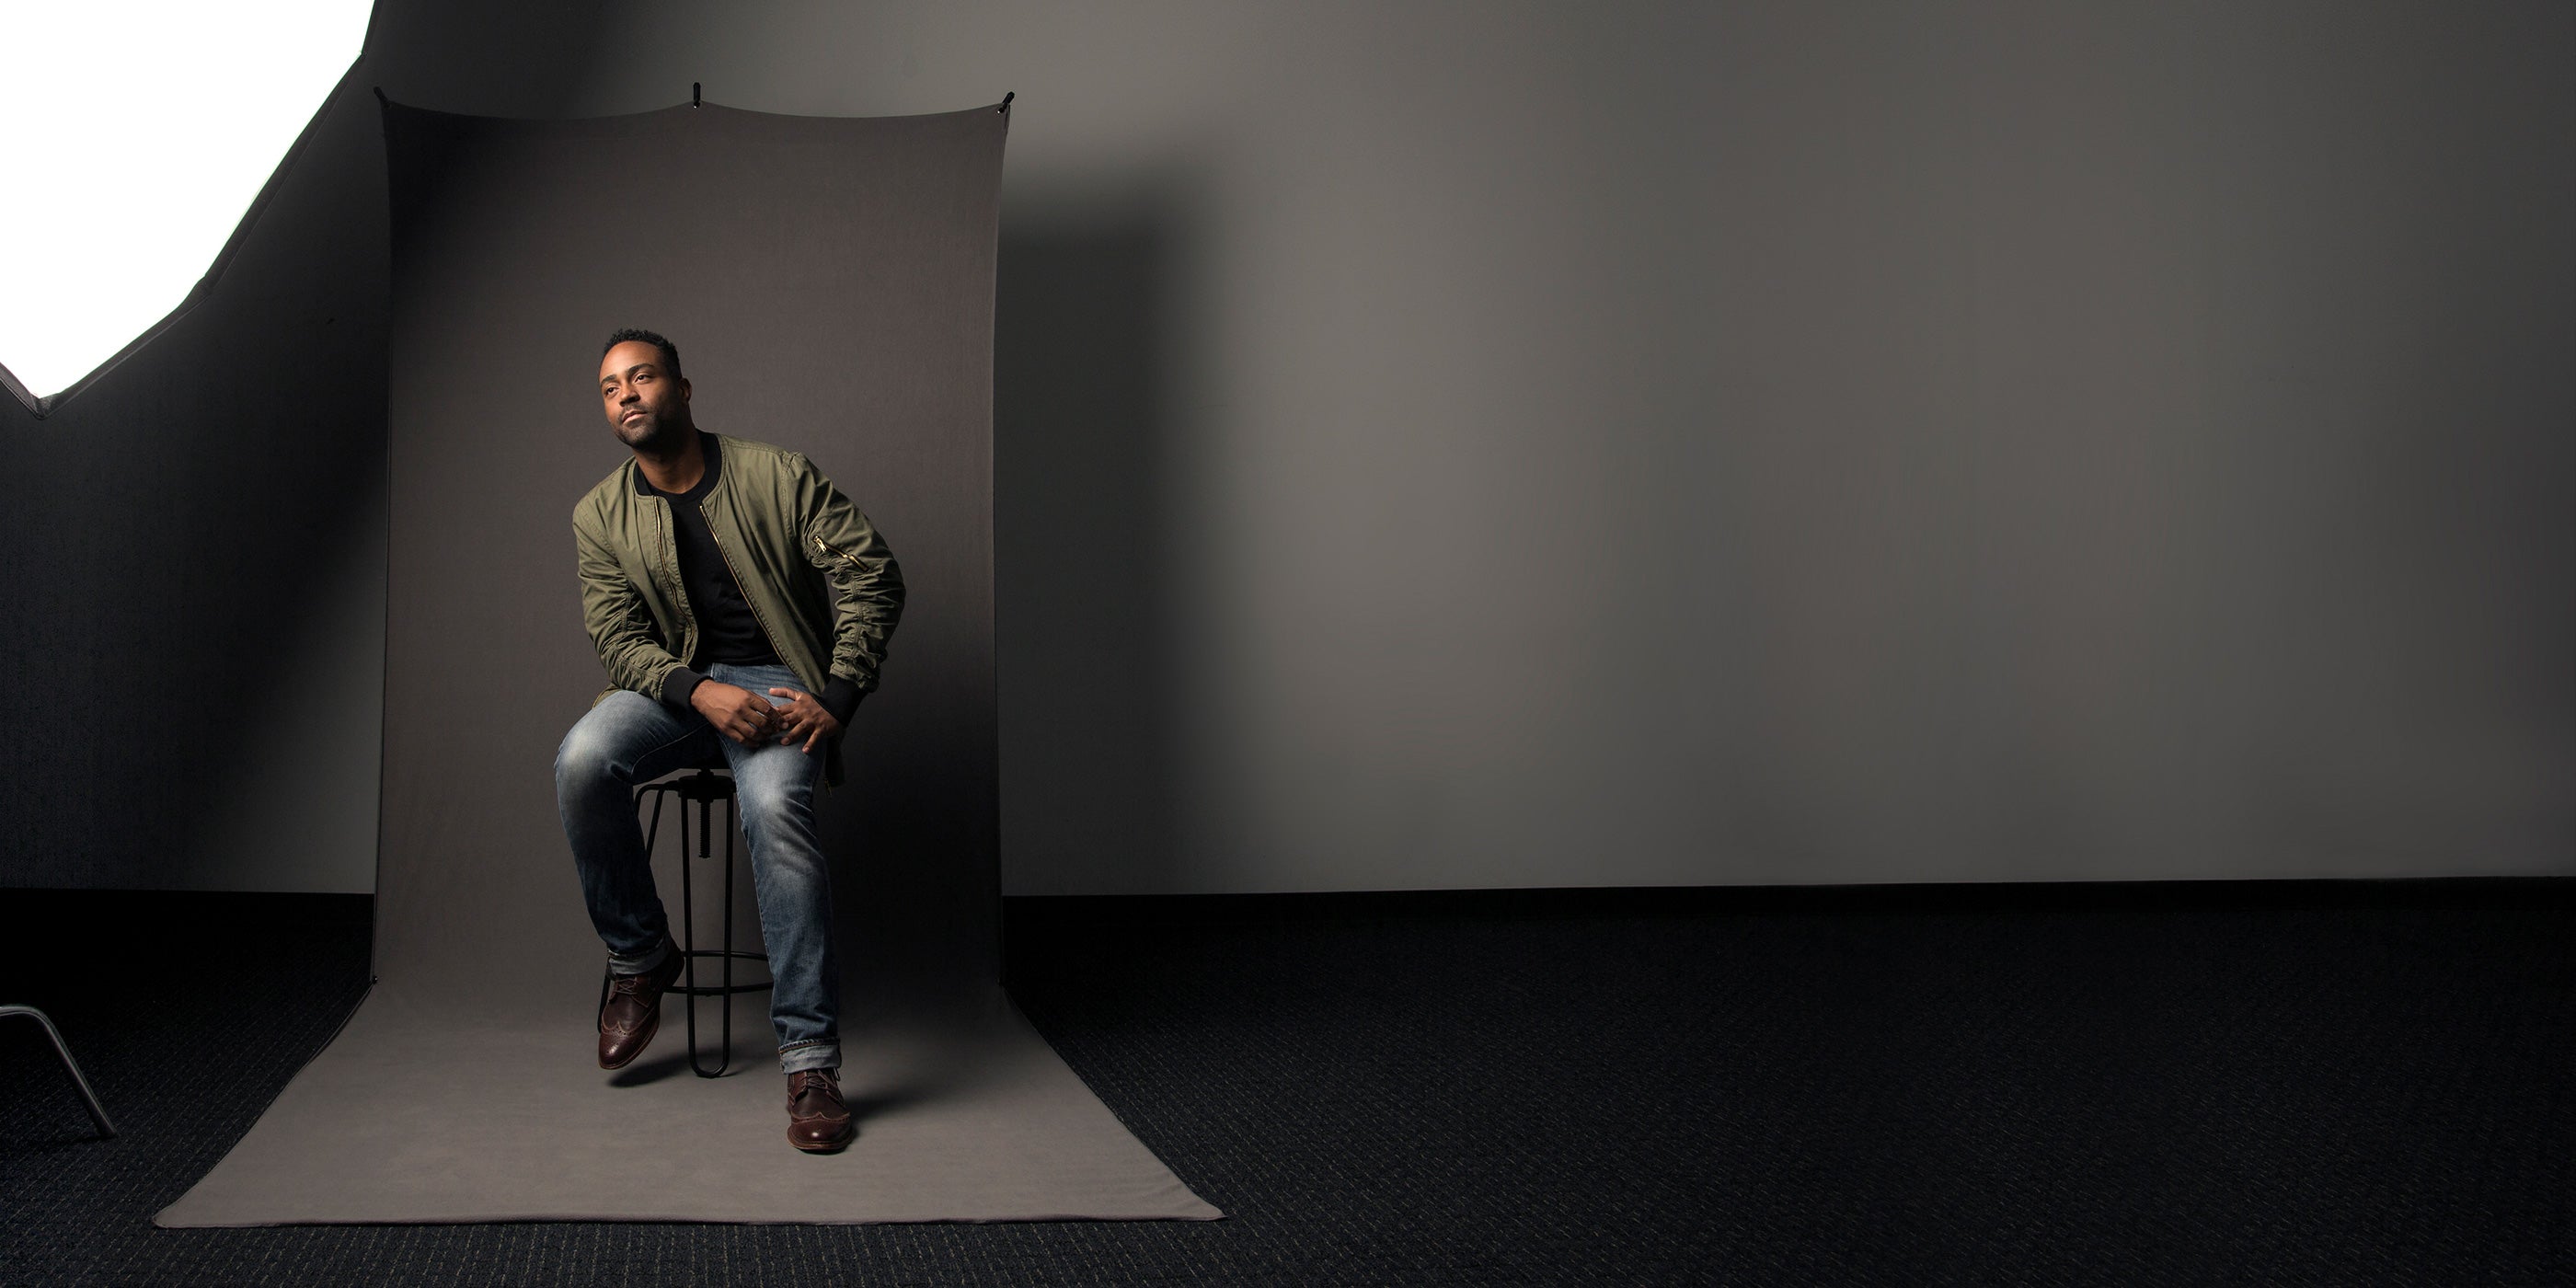 Full-Length Portrait on Chair With 5' x 12' X-Drop Sweep Backdrop